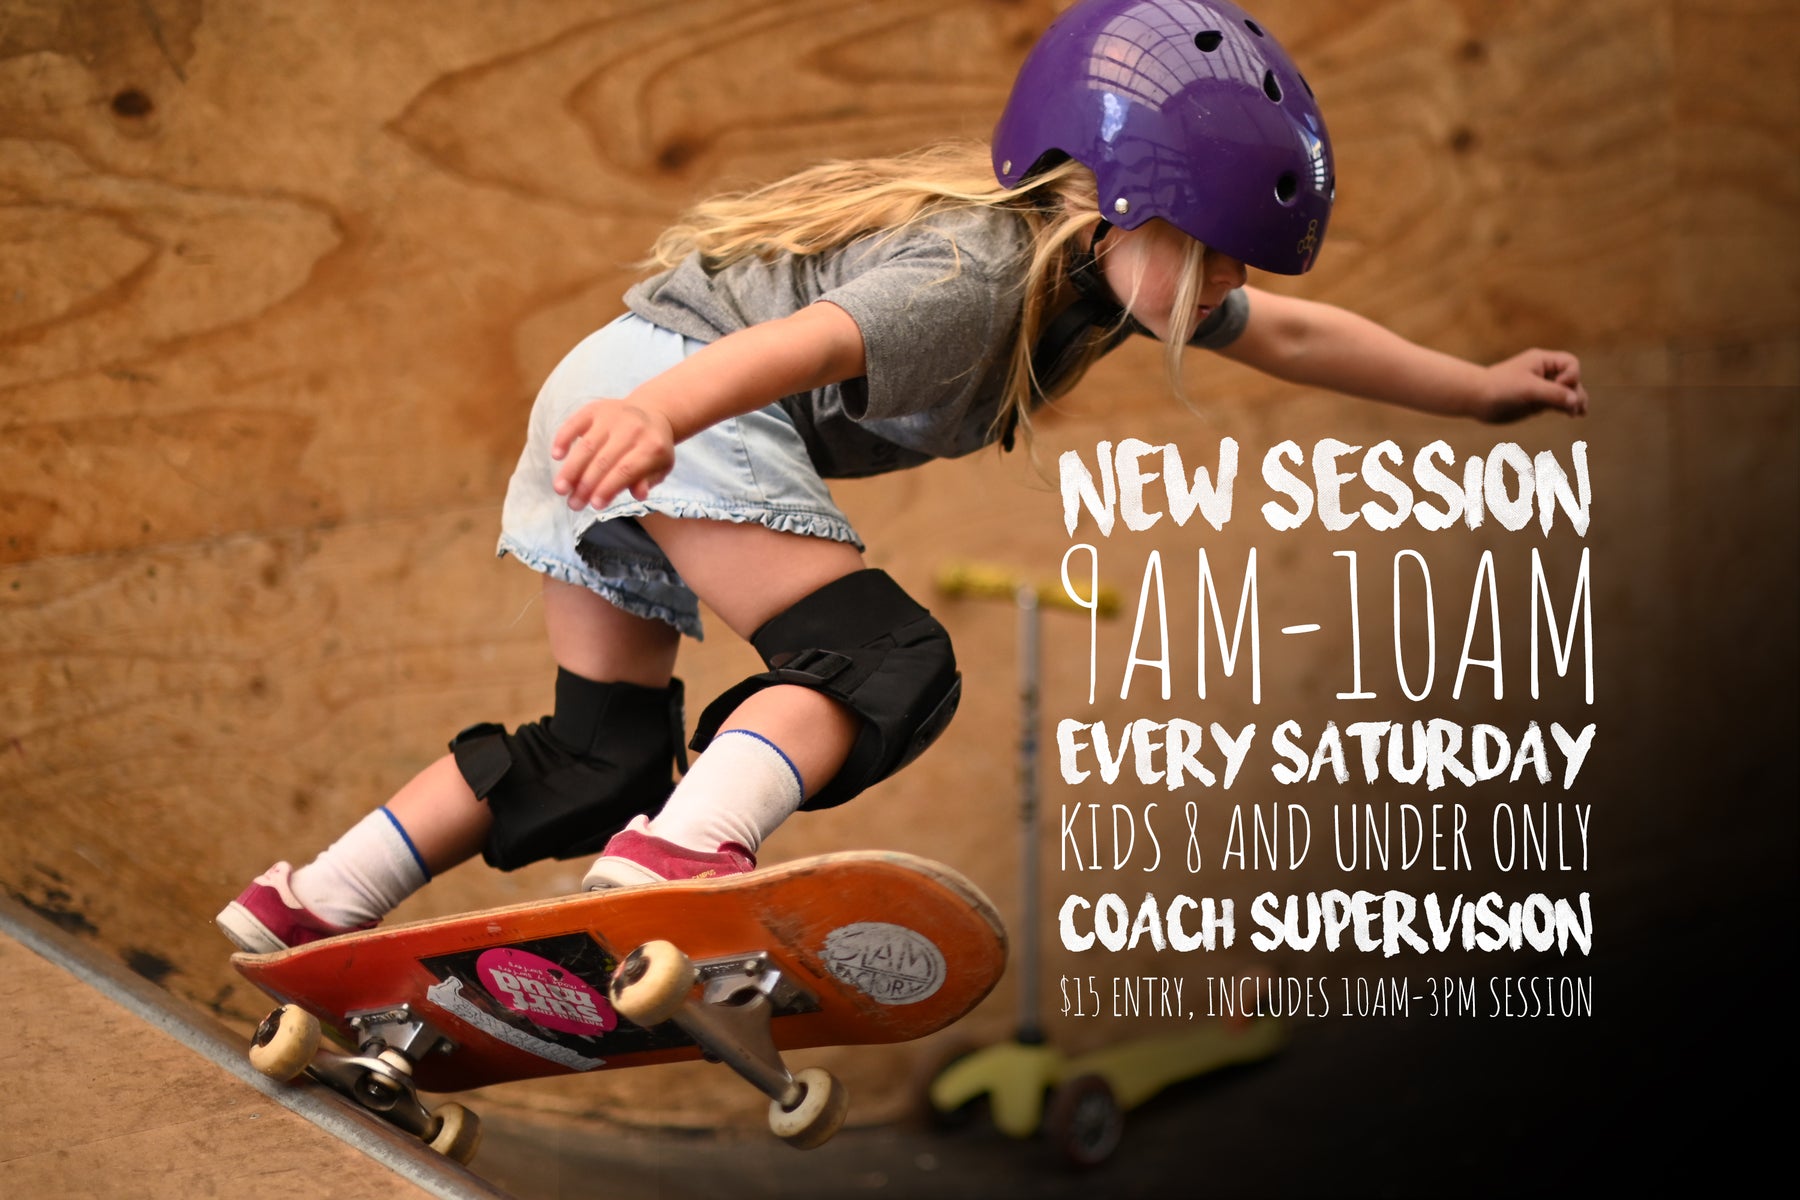 NEW SESSION: KIDS AGED 8 AND UNDER ONLY